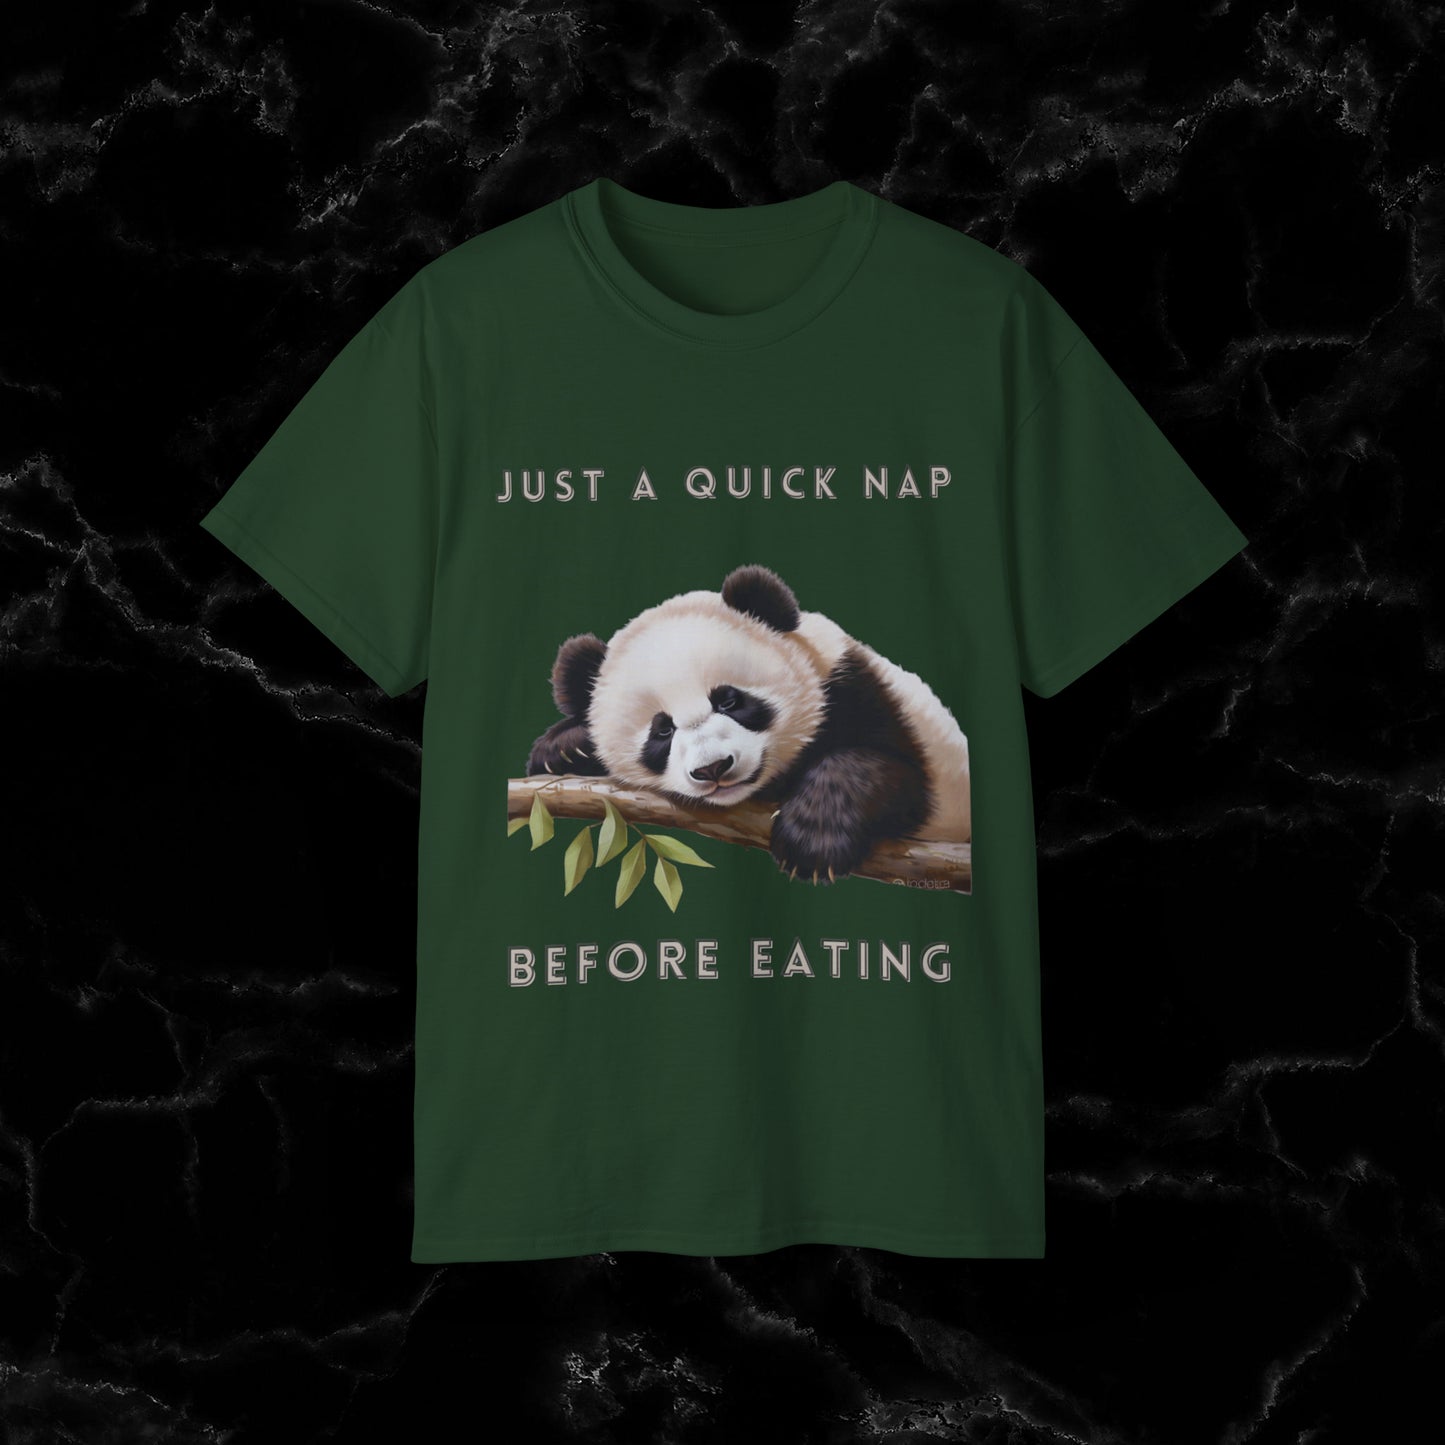 Nap Time Panda Unisex Funny Tee - Hilarious Panda Nap Design - Just a Quick Nap Before Eating T-Shirt Forest Green S 